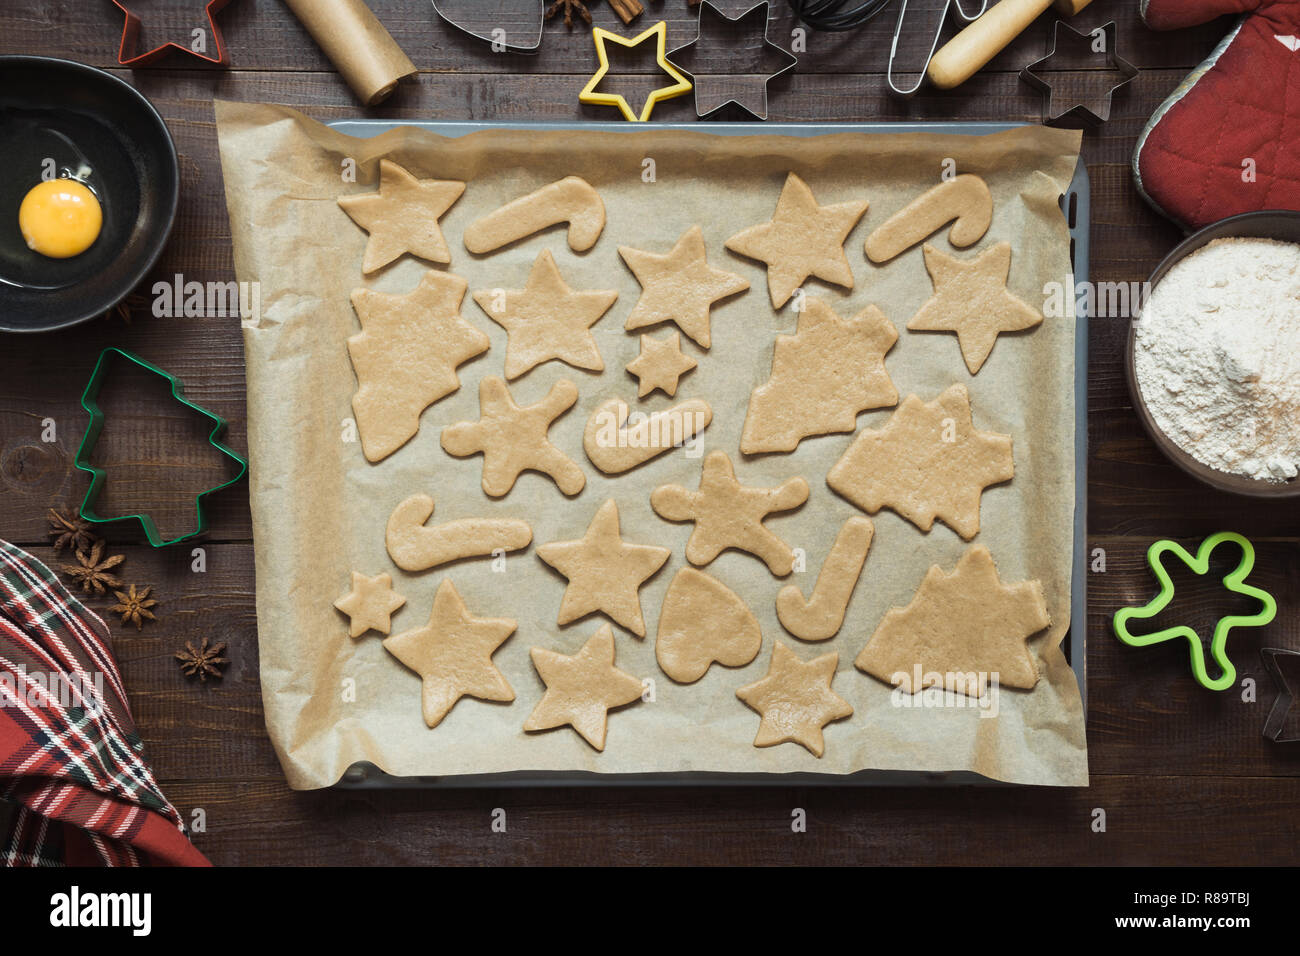 Homemade christmas cookies on parchment. Xmas. The process of baking homemade cookies. View from above. Stock Photo